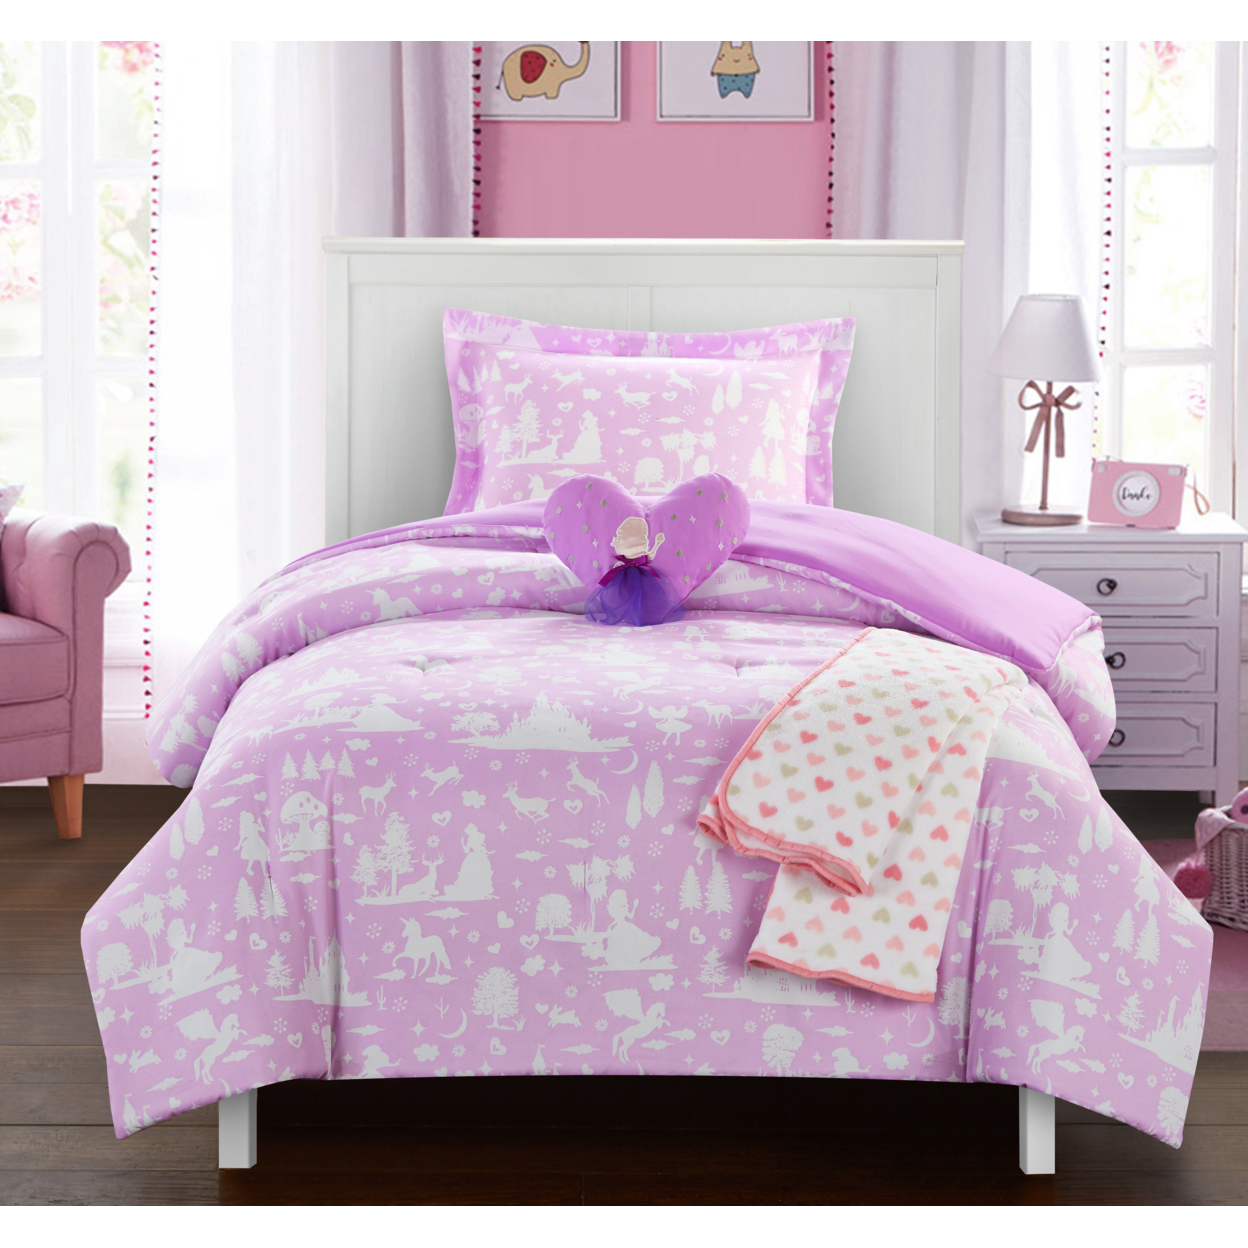 5 Or 4 Piece Comforter Set Youth Design Bedding - Throw Blanket Decorative Pillow Shams Included - Lavender, Full